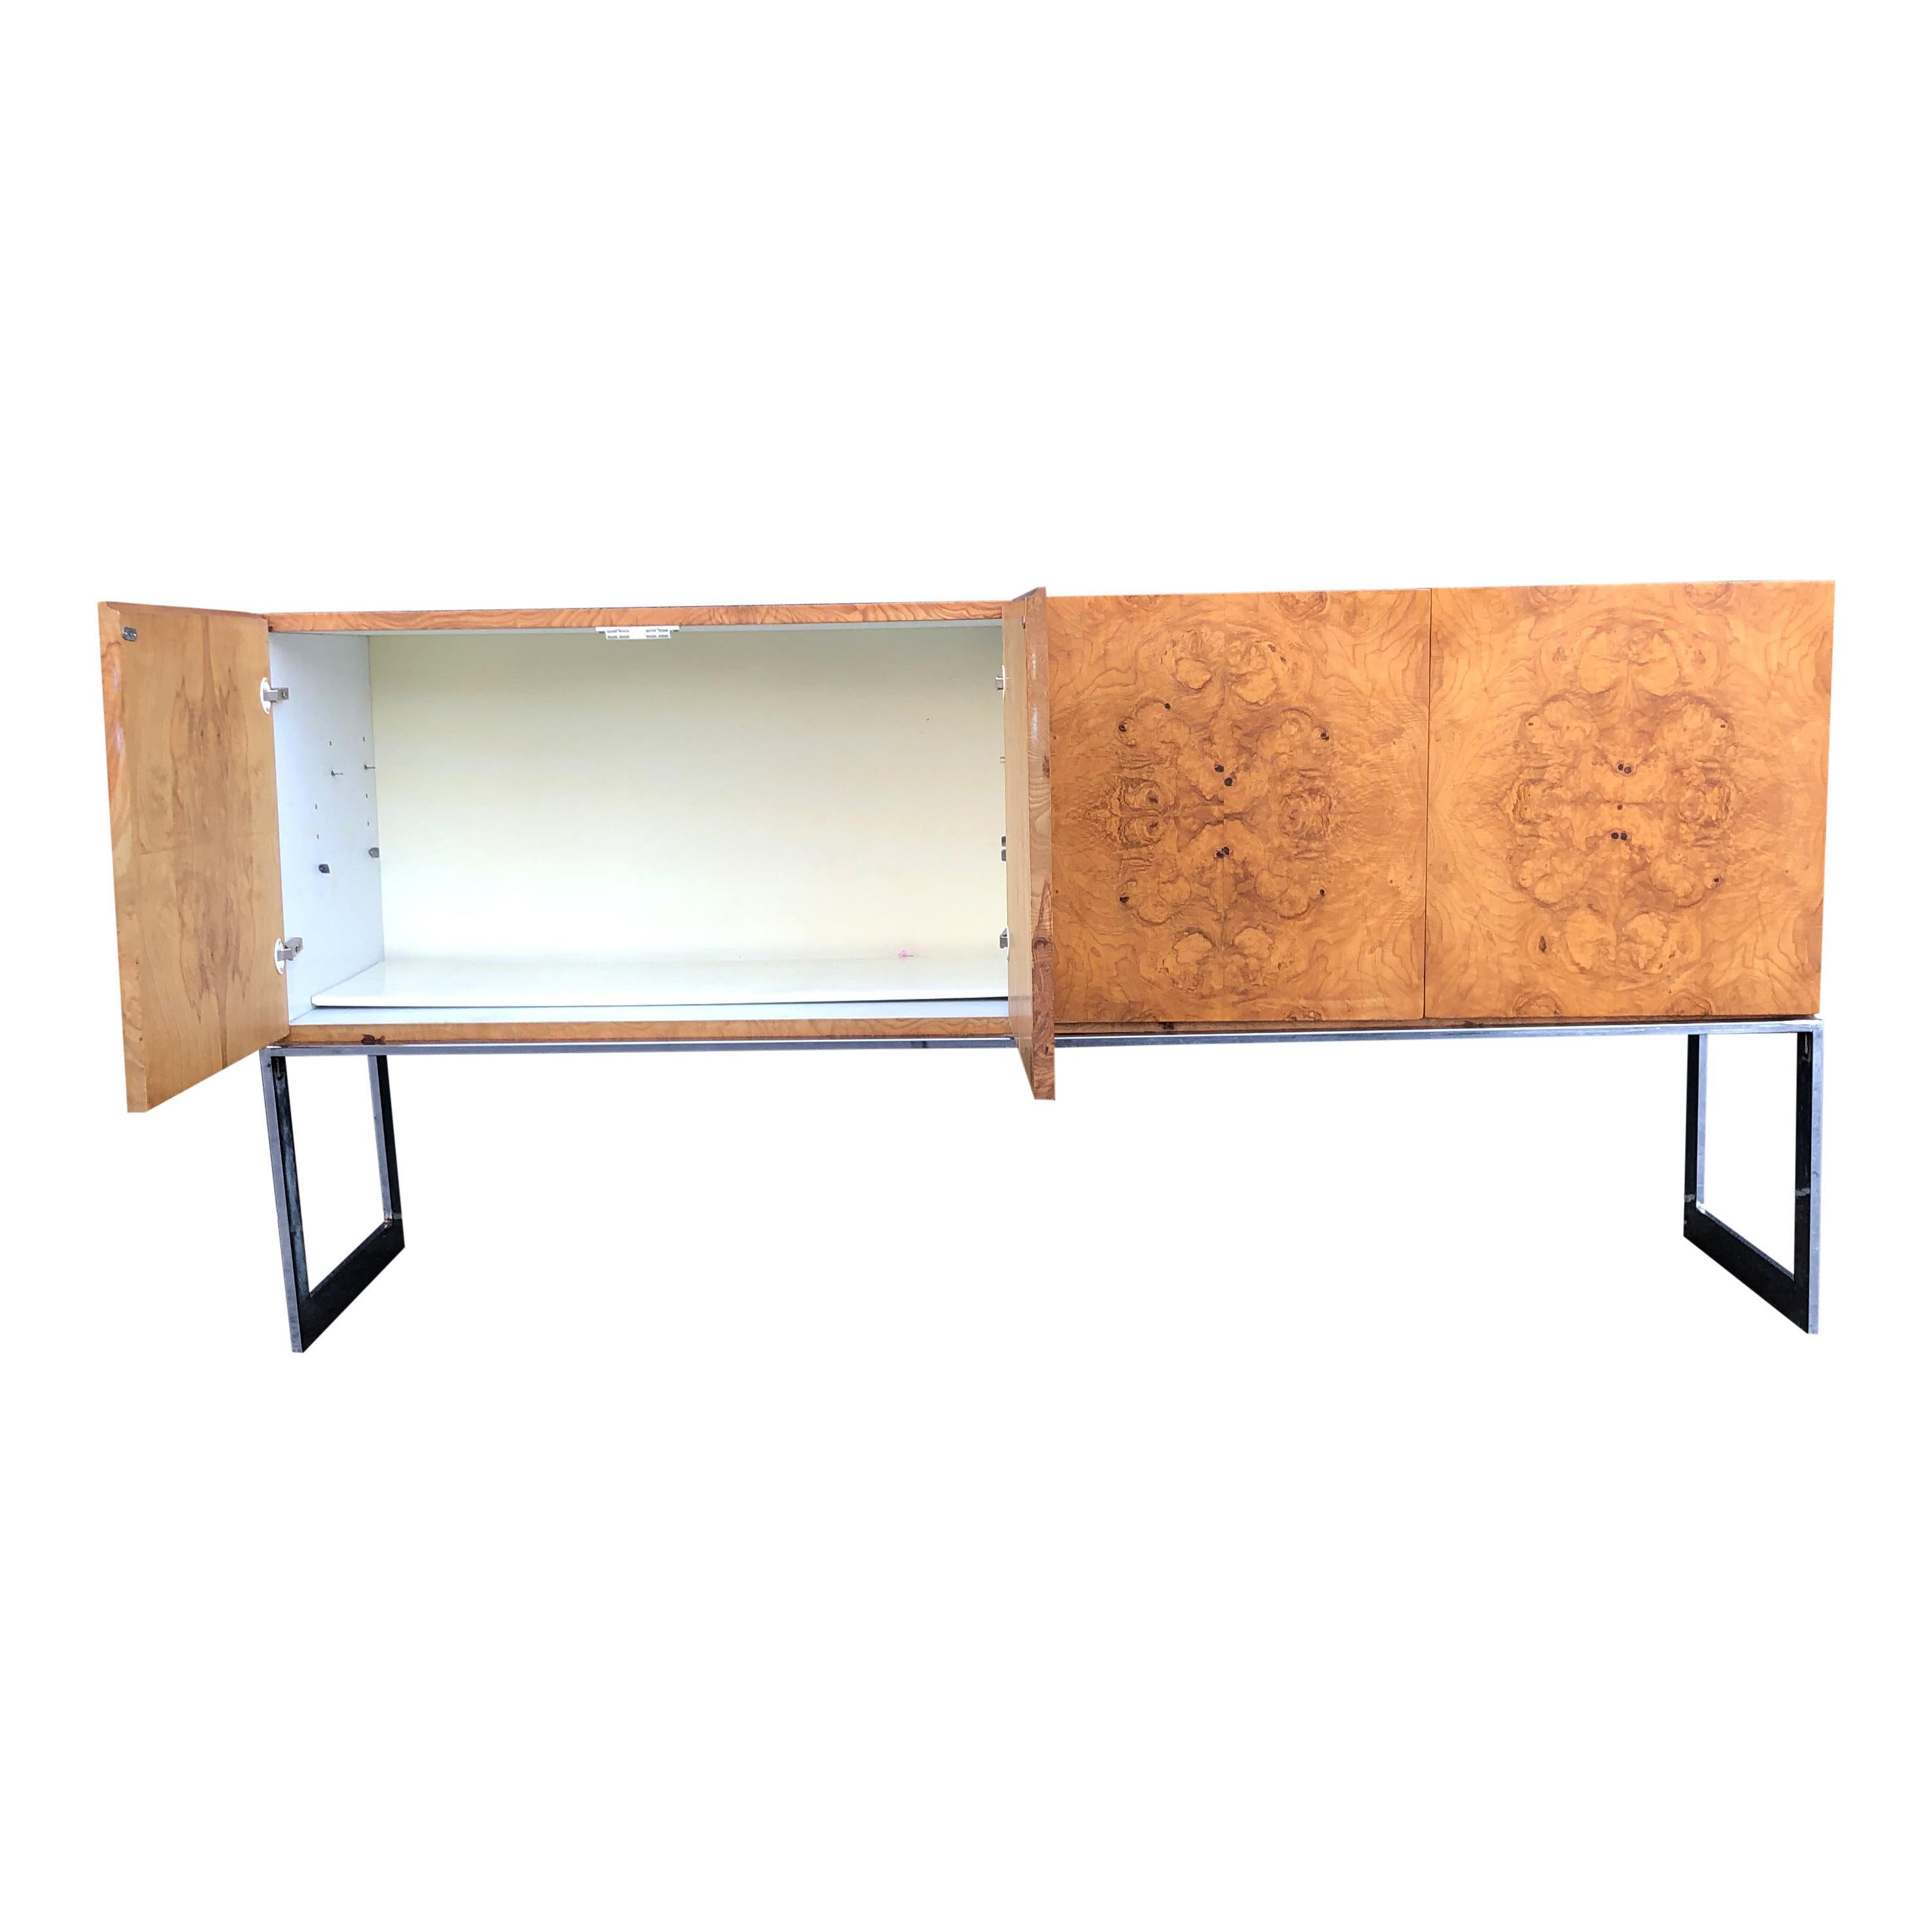 For sale is a beautiful Milo Baughman for Thayer Coggin Sideboard/credenza in bookmatched olive burl wood veener on a chrome base. 

The piece is a beautiful mod/1970s statement piece from one of the masters of American design. 

The side board